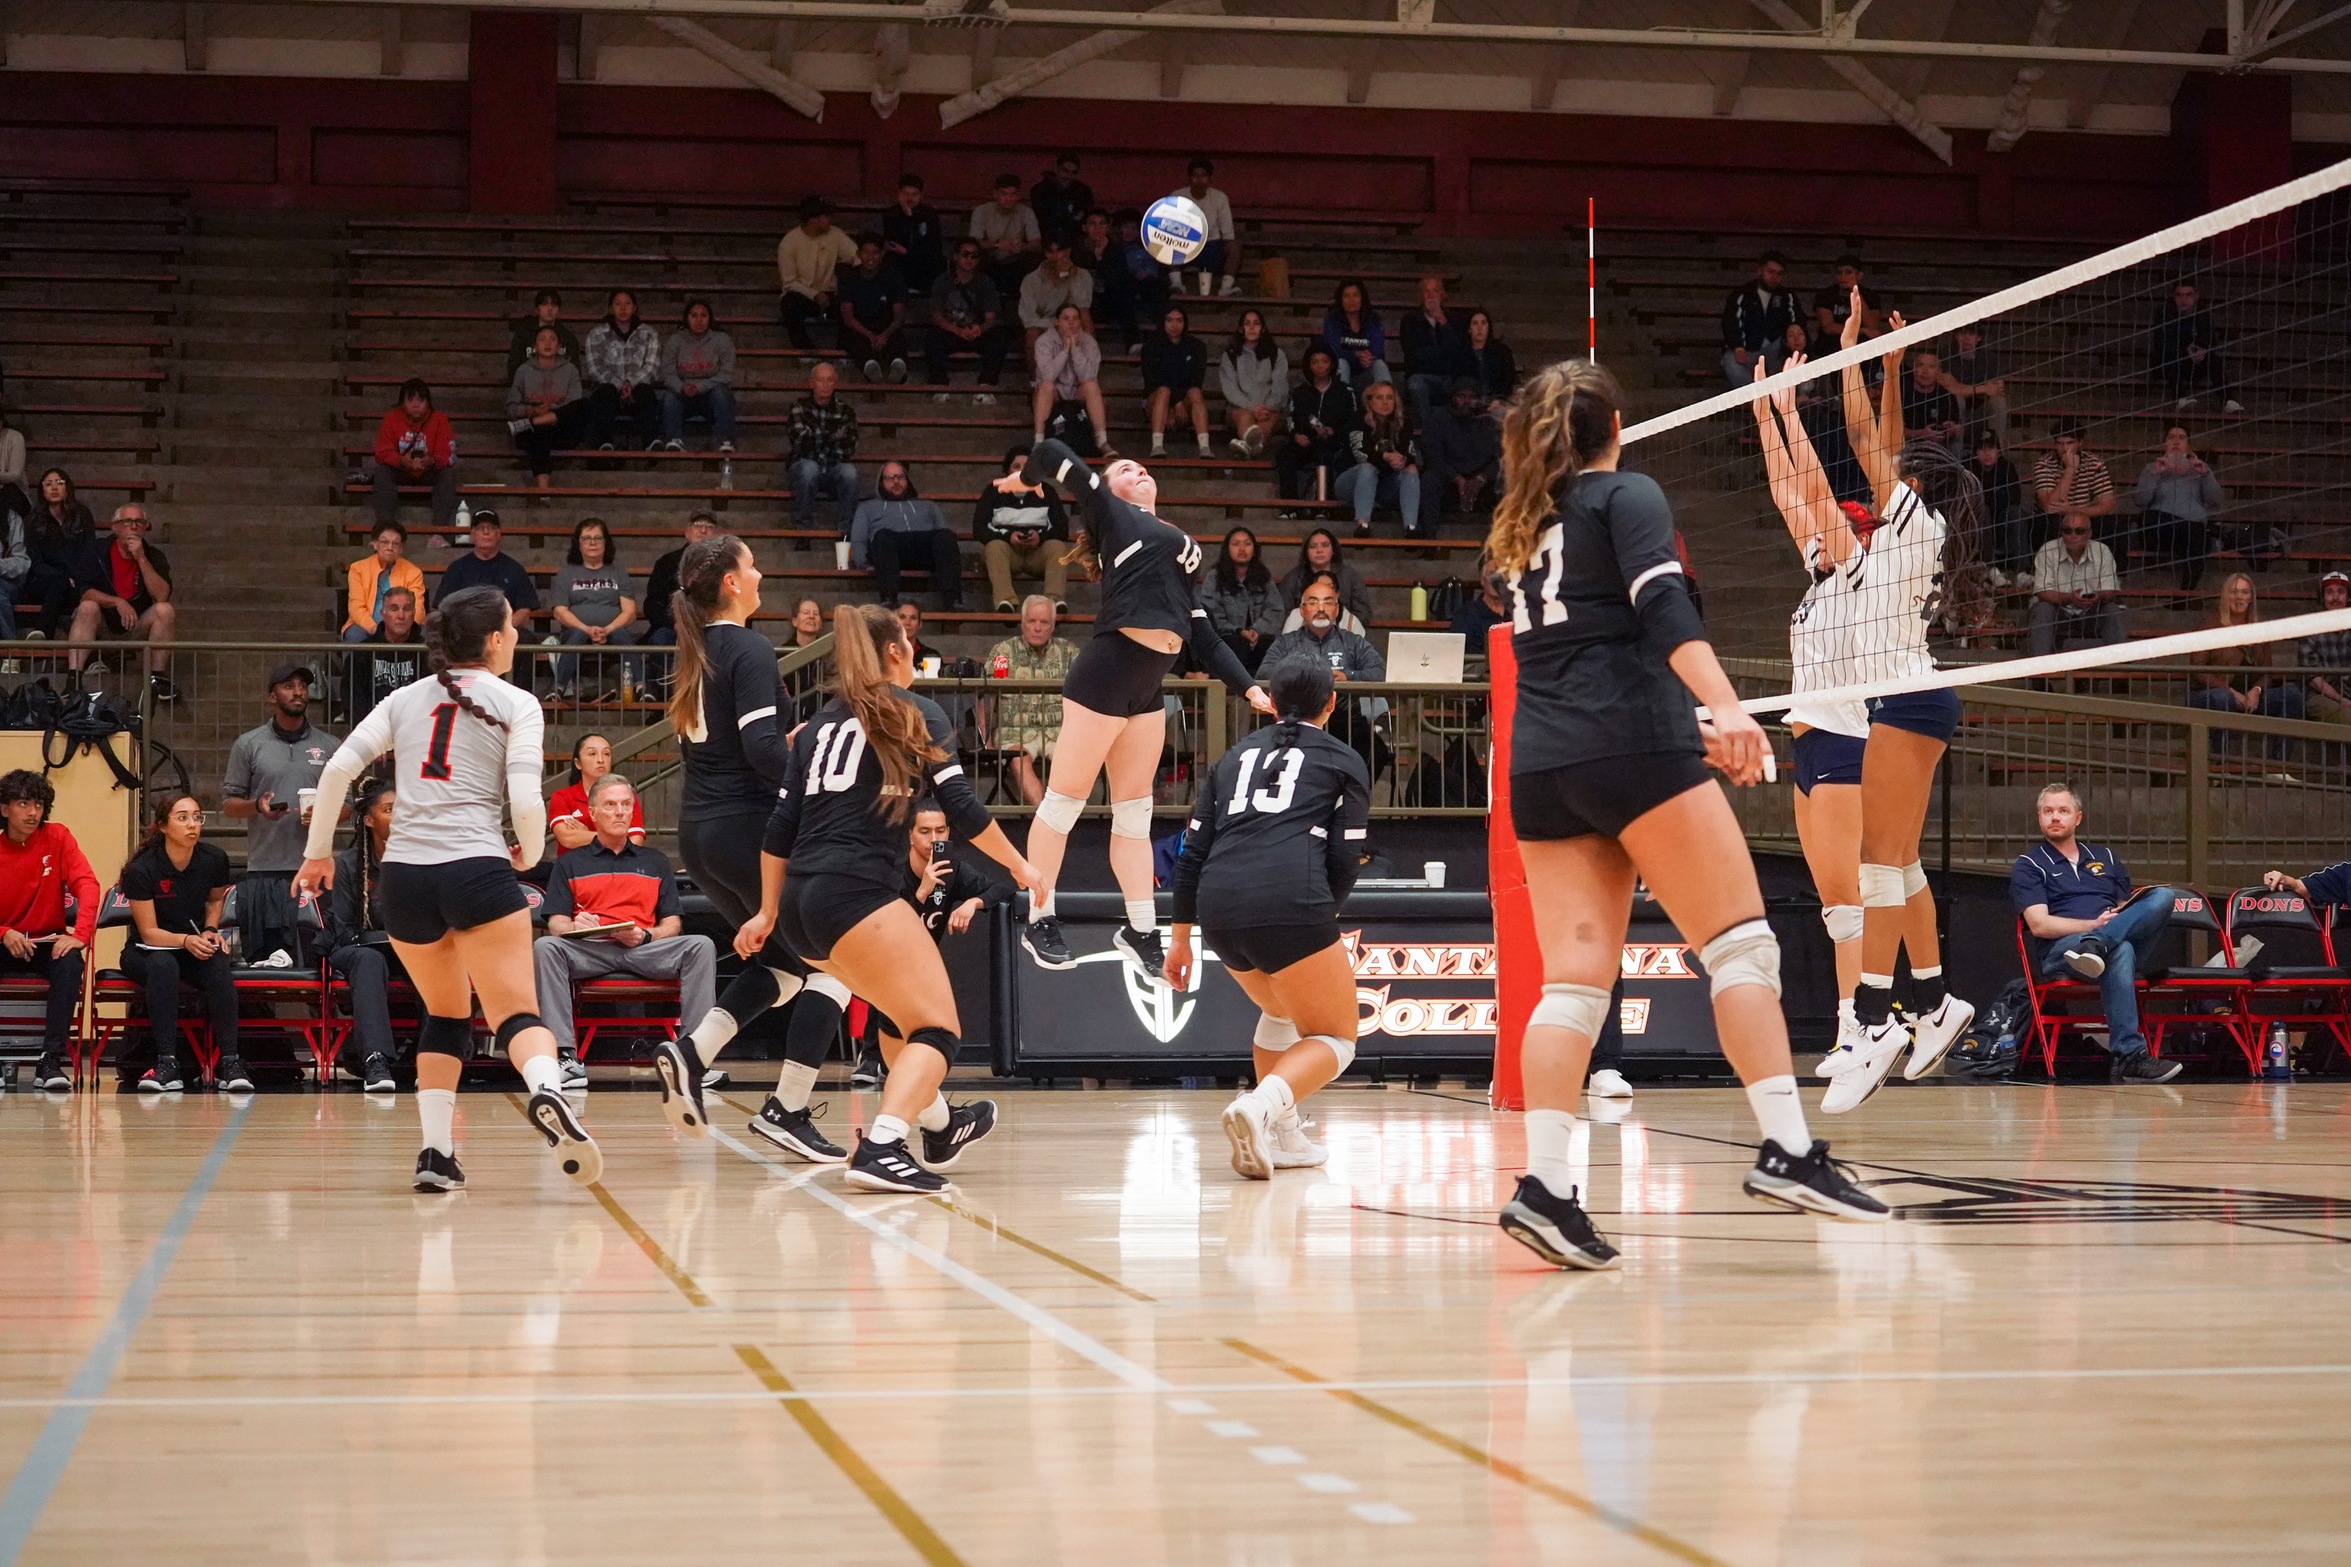 No. 7 Seeded Dons End the Year with 3-0 Loss to No. 10 Canyons in Round 2 of SoCal Regionals